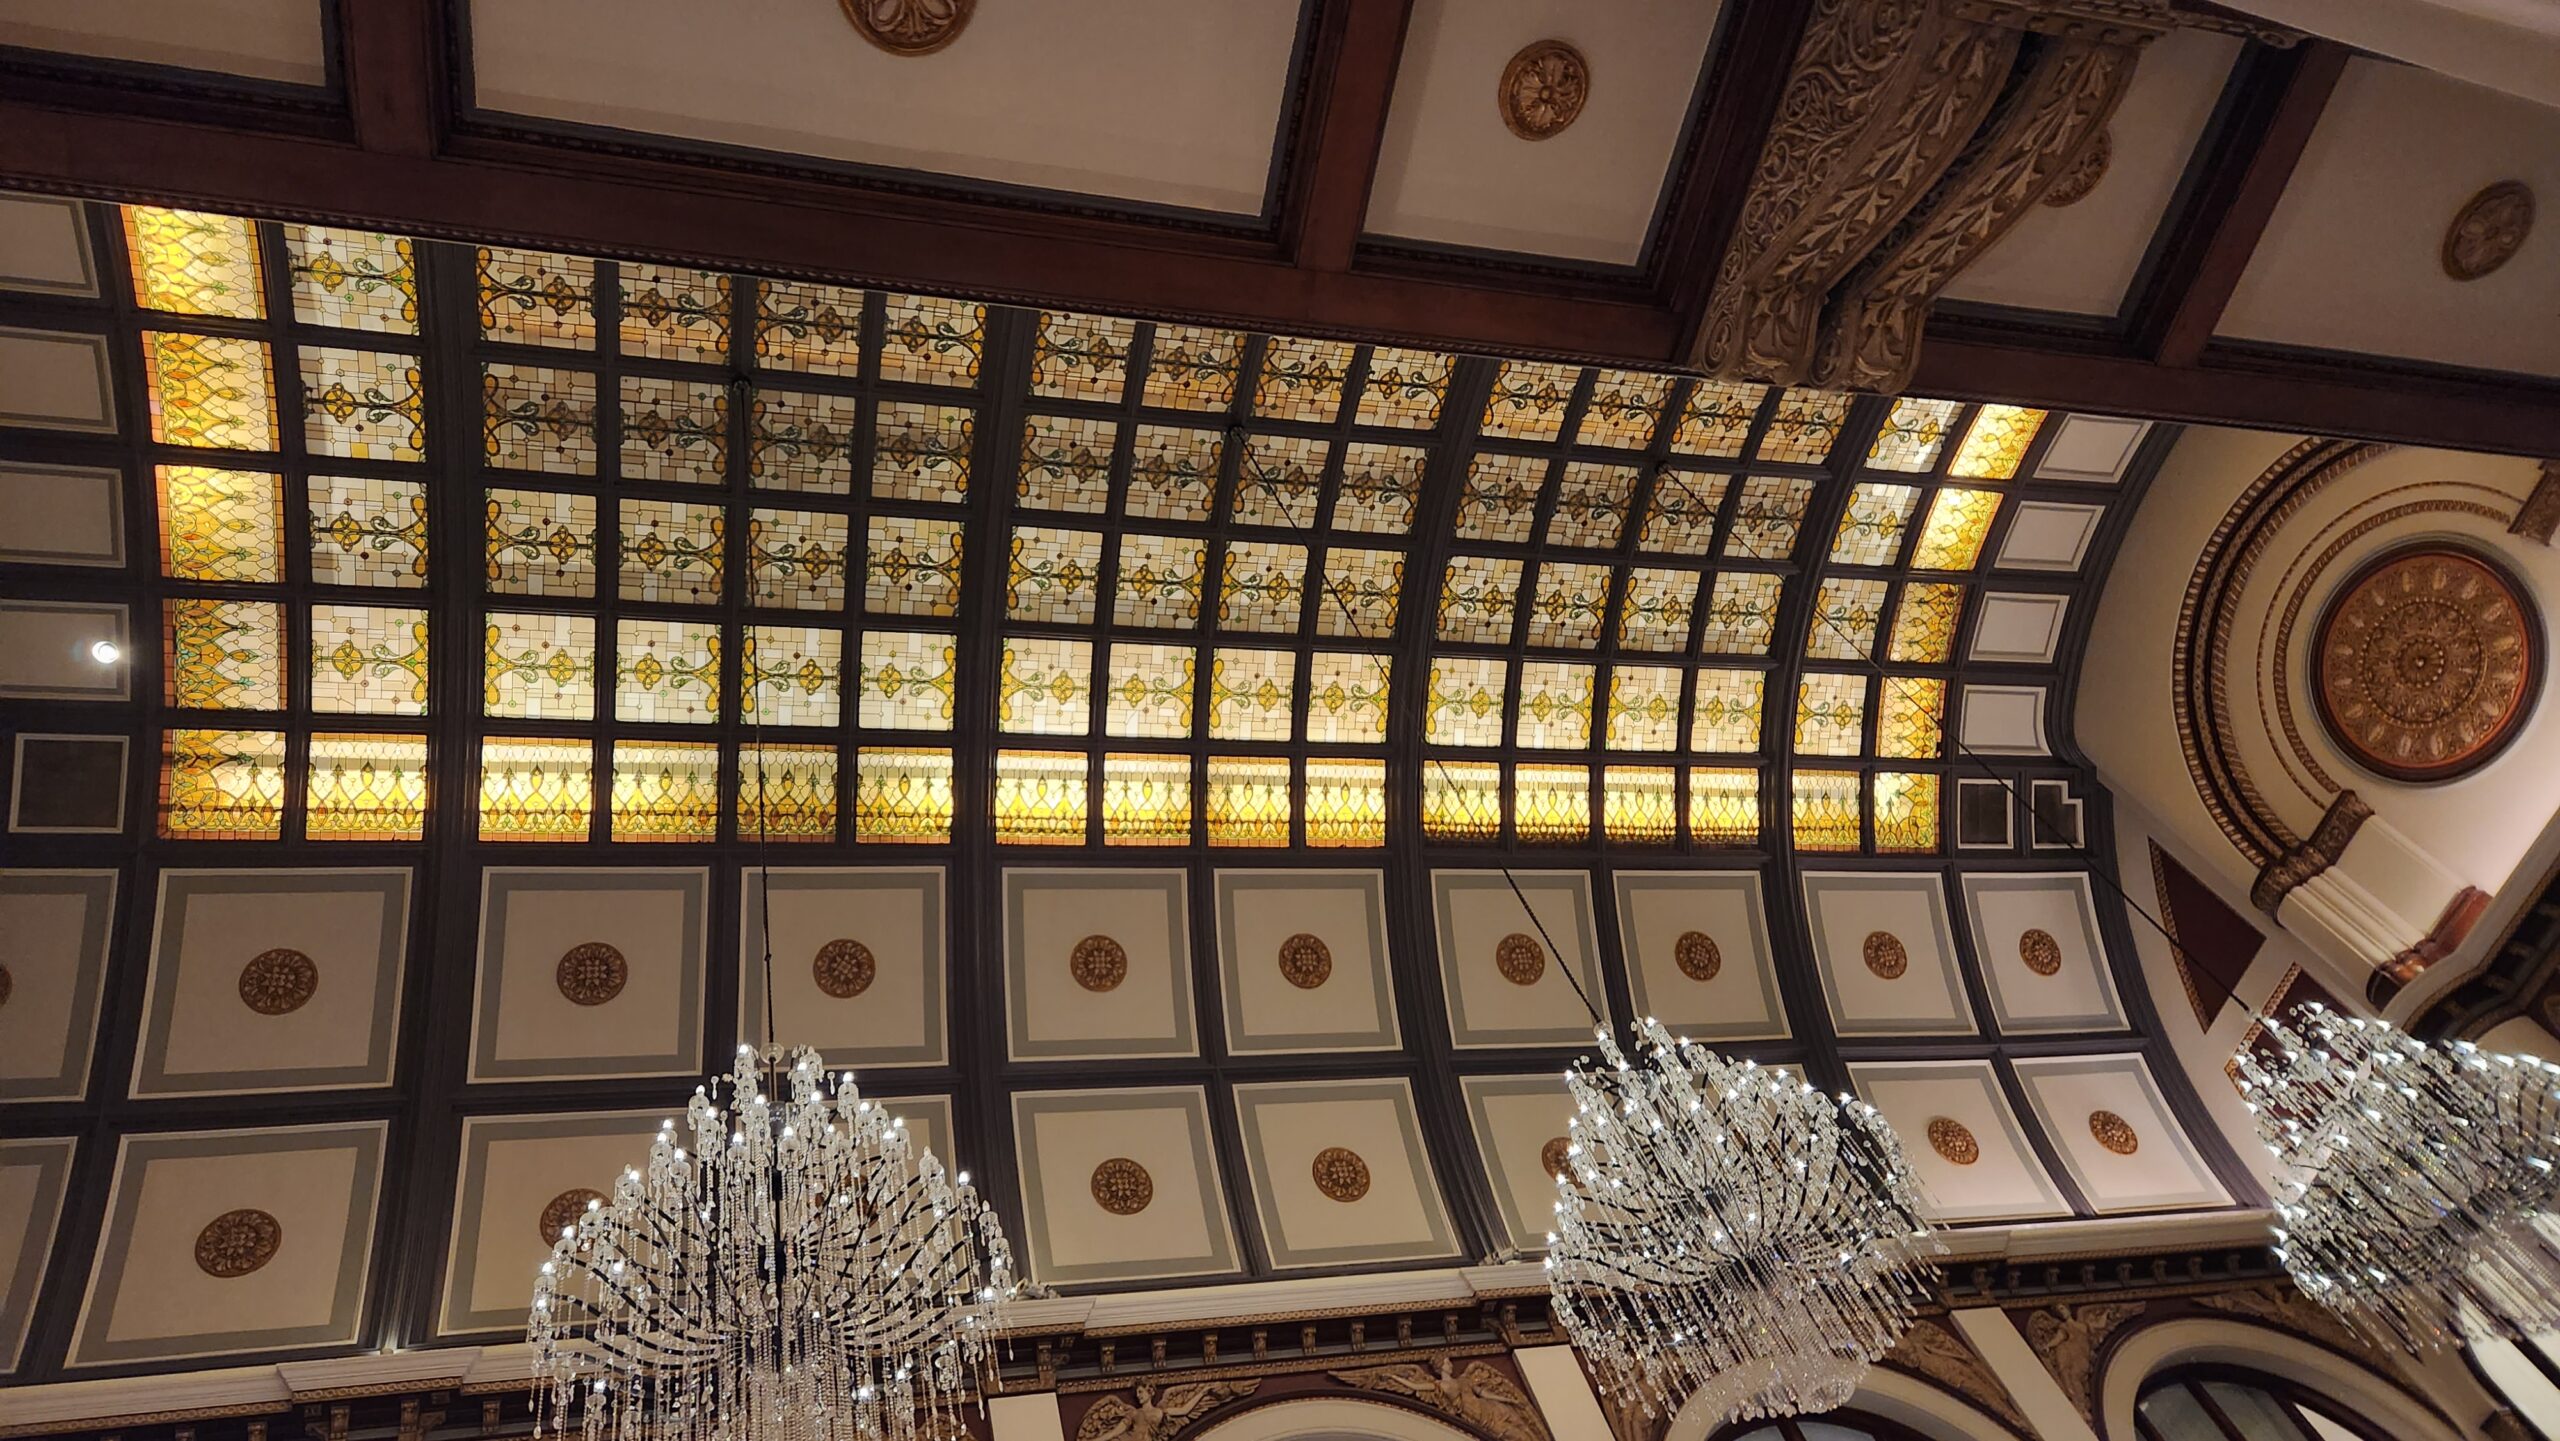 A photo looking straight up, stained glass windows in a grid on the ceiling emanating warm yellow light, chandeliers dangling below.